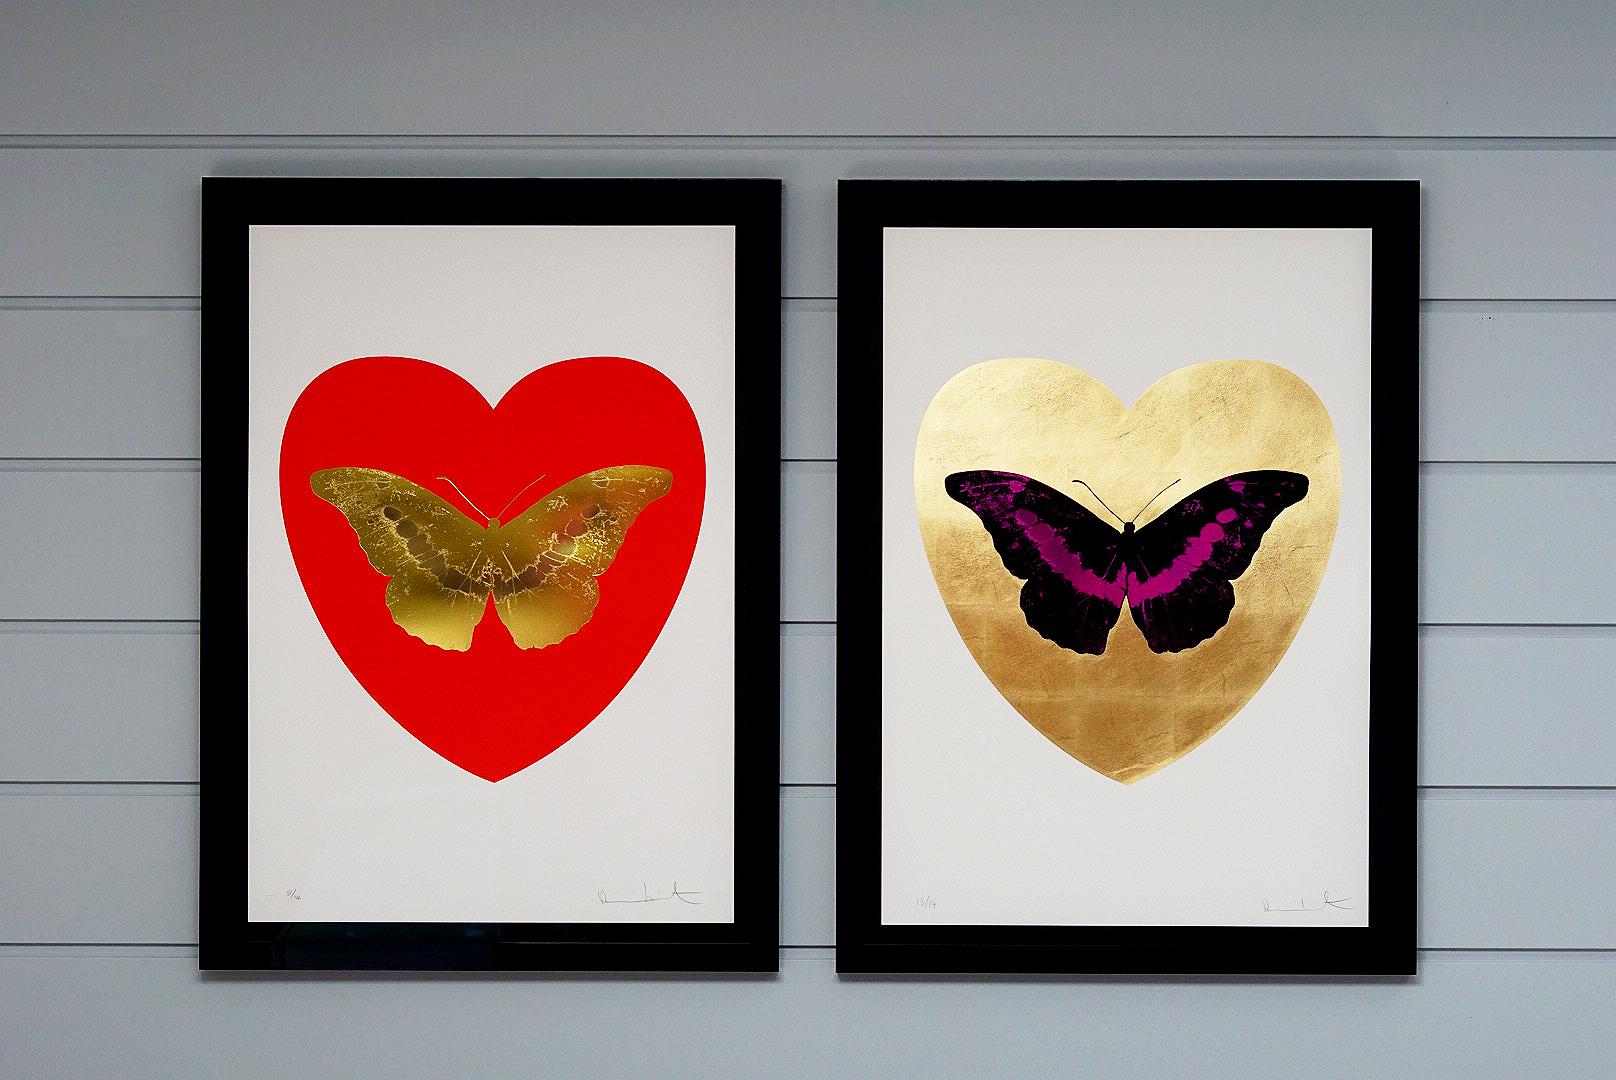 Damien Hirst, Butterfly, Poppy Red/Gold (2015) 7